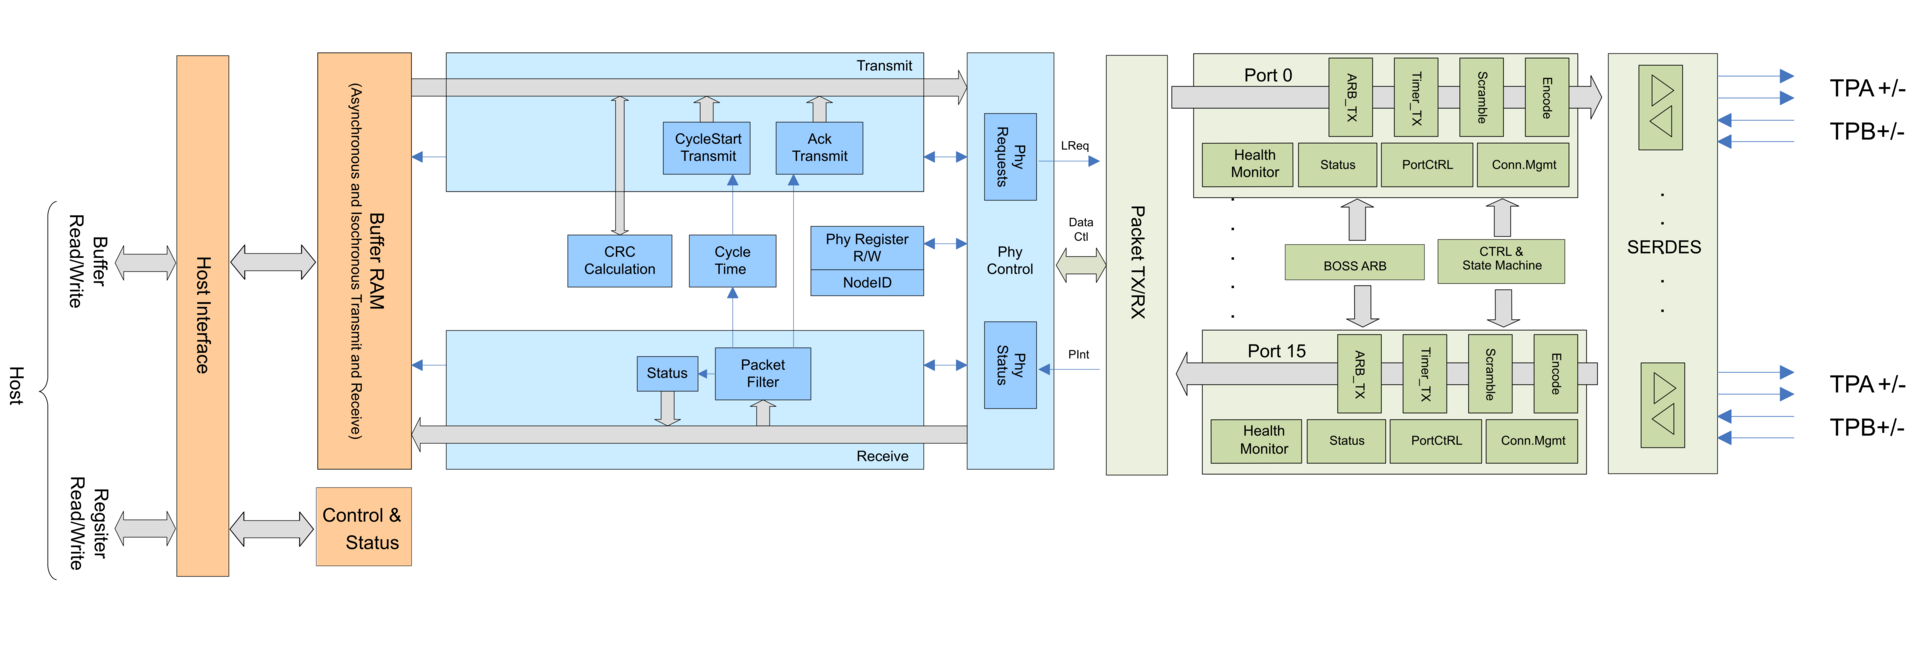 1394 and AS5643 IP Core solutions - FireCore Basic Block Diagram